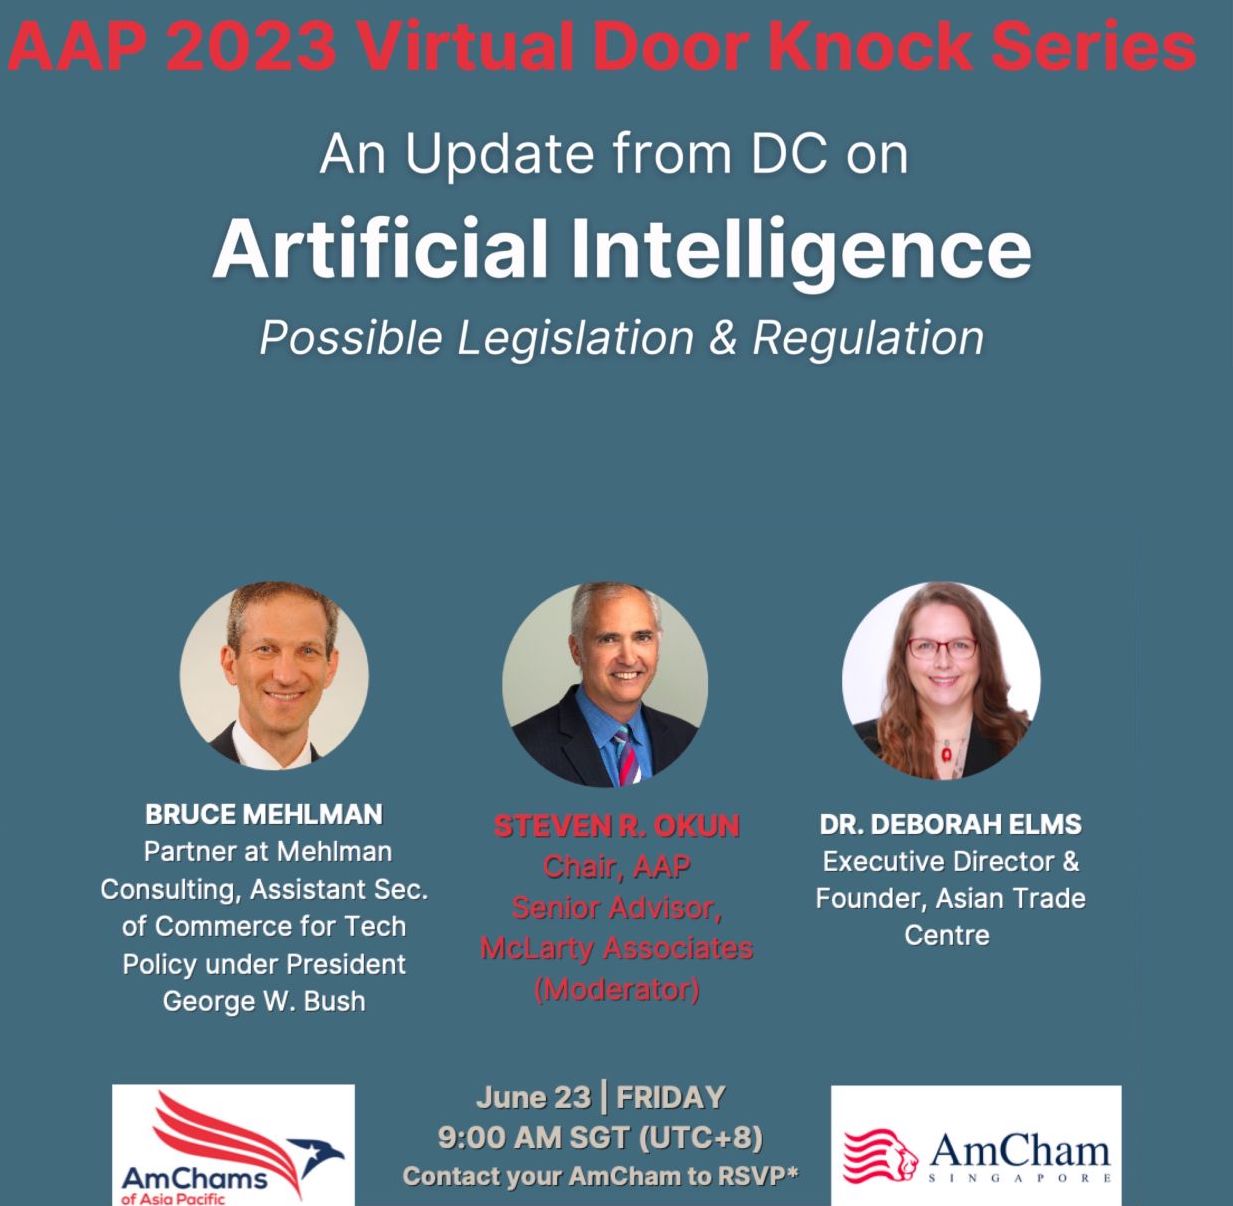 AAP 2023 Virtual Door Knock Series An Update from DC on AI Possible